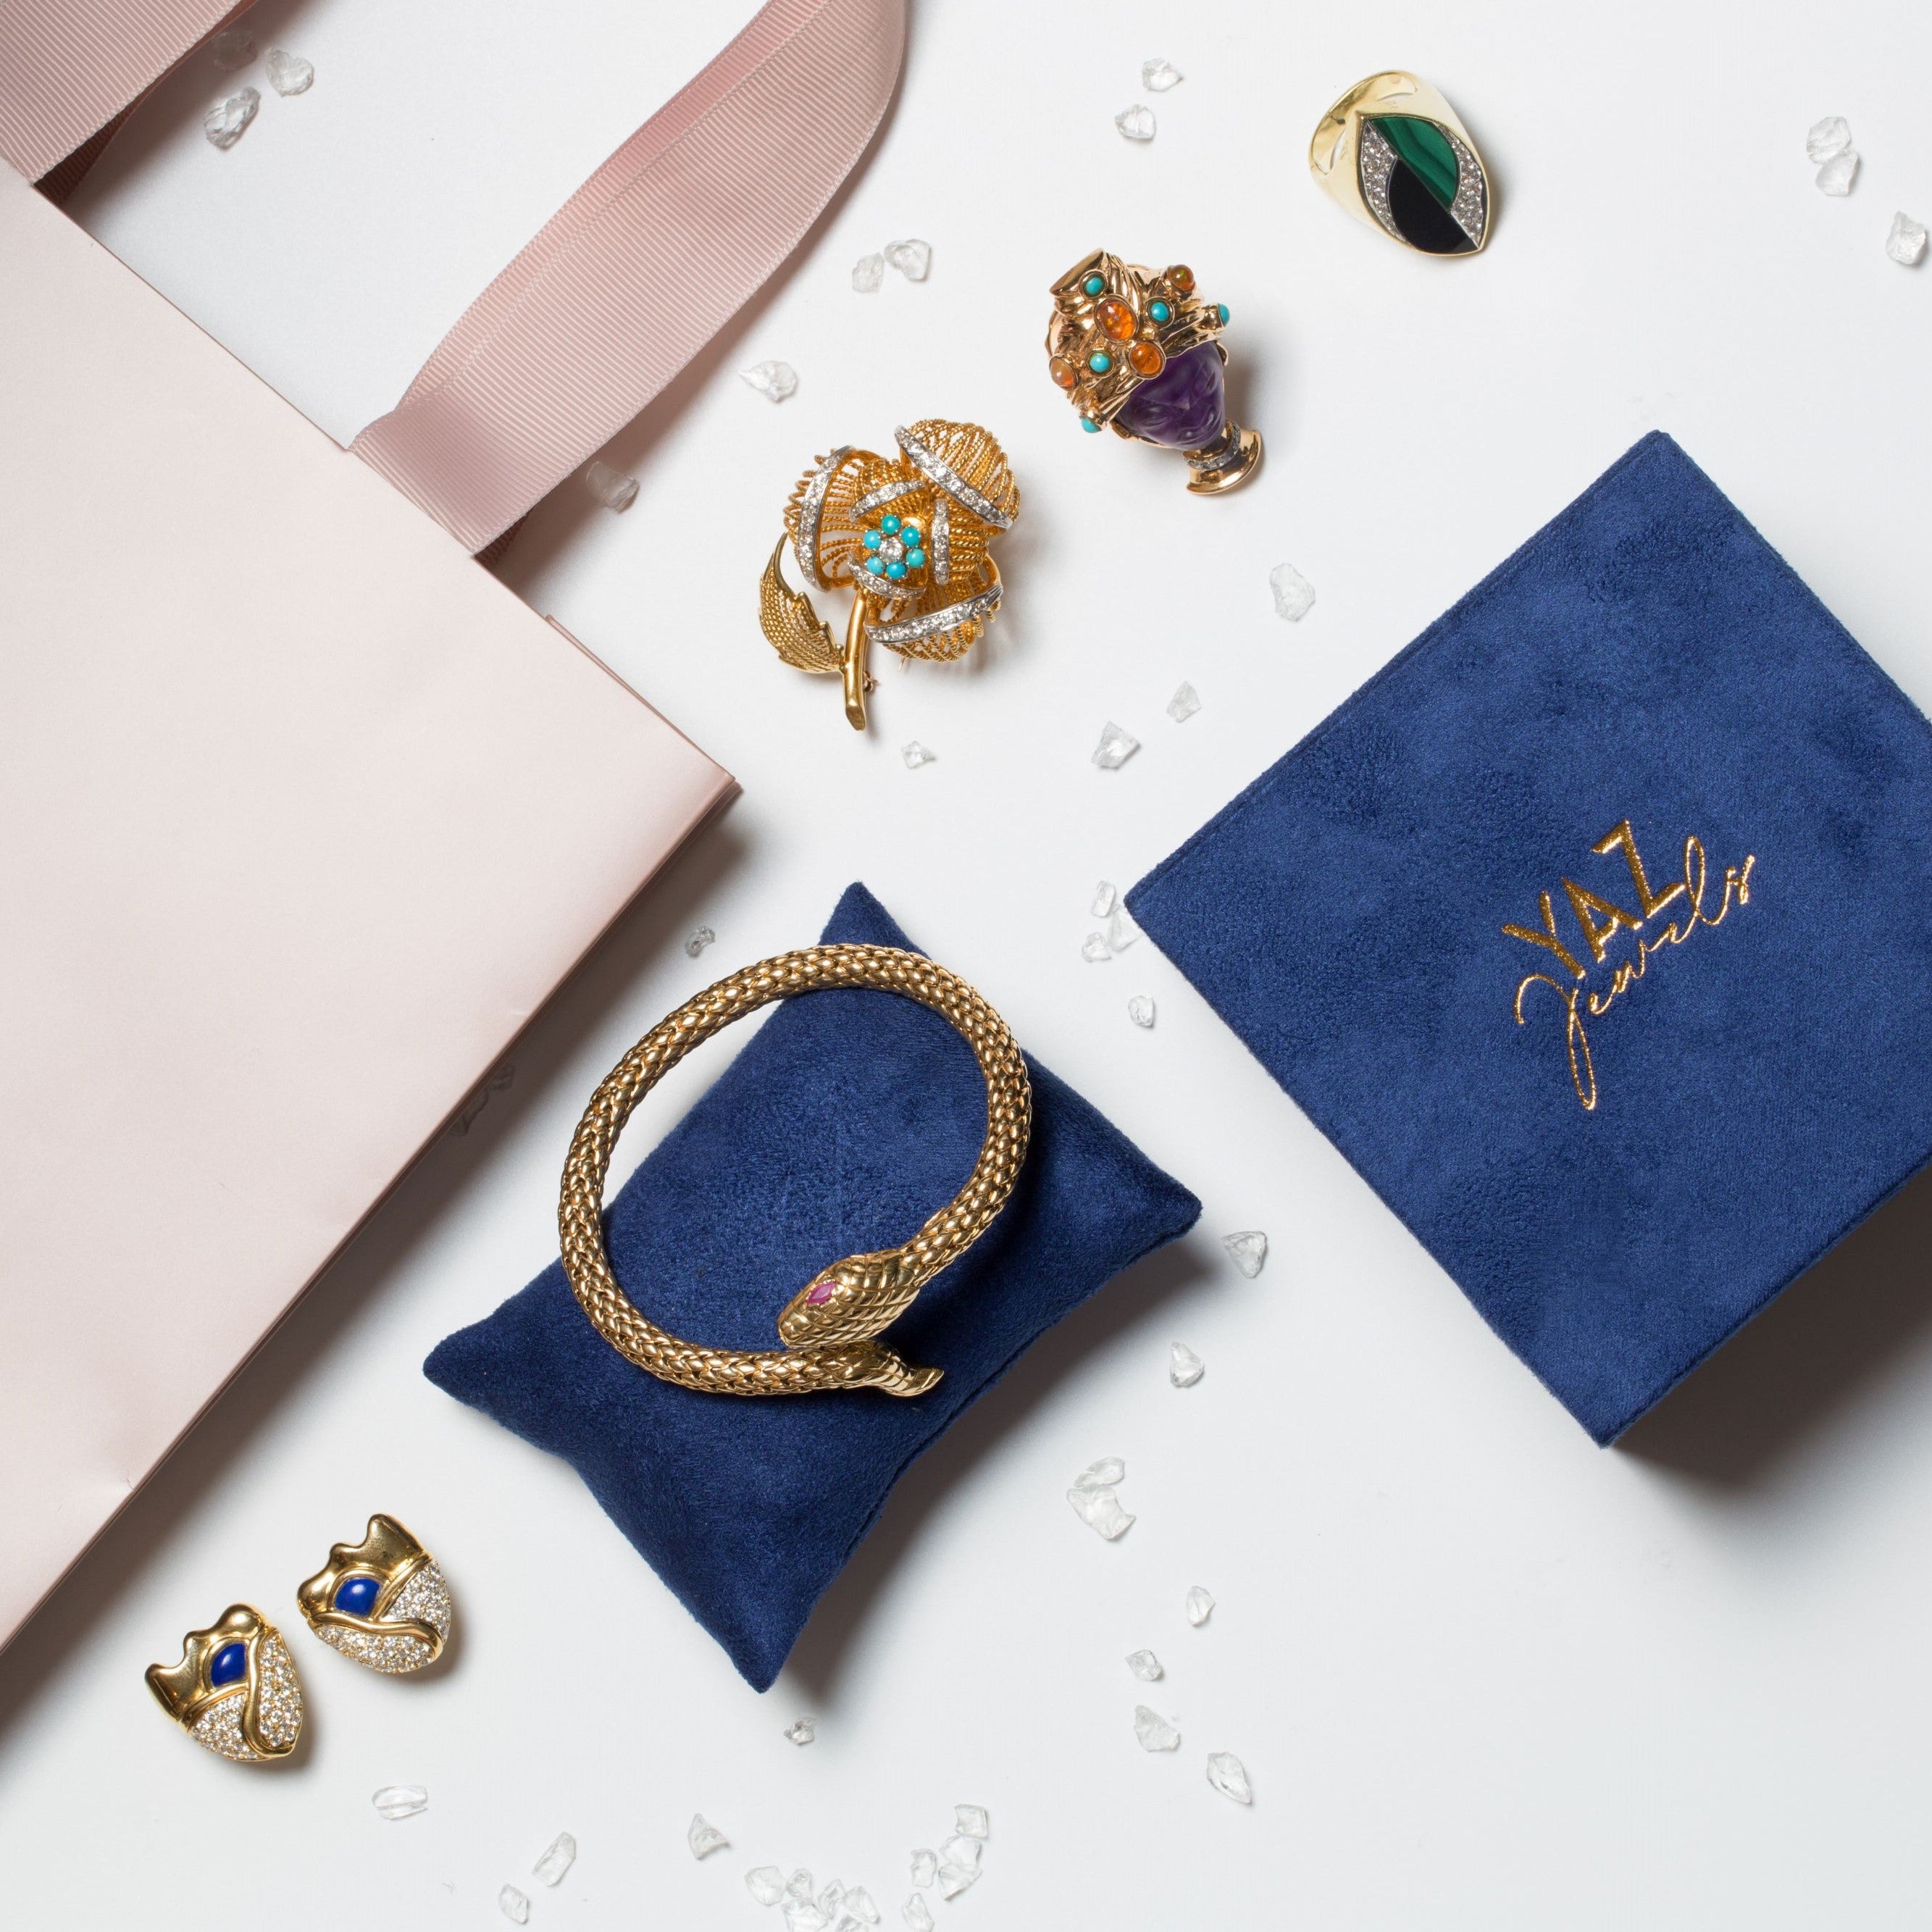 Choose vintage luxury for an extra-special Mother’s Day gift this year